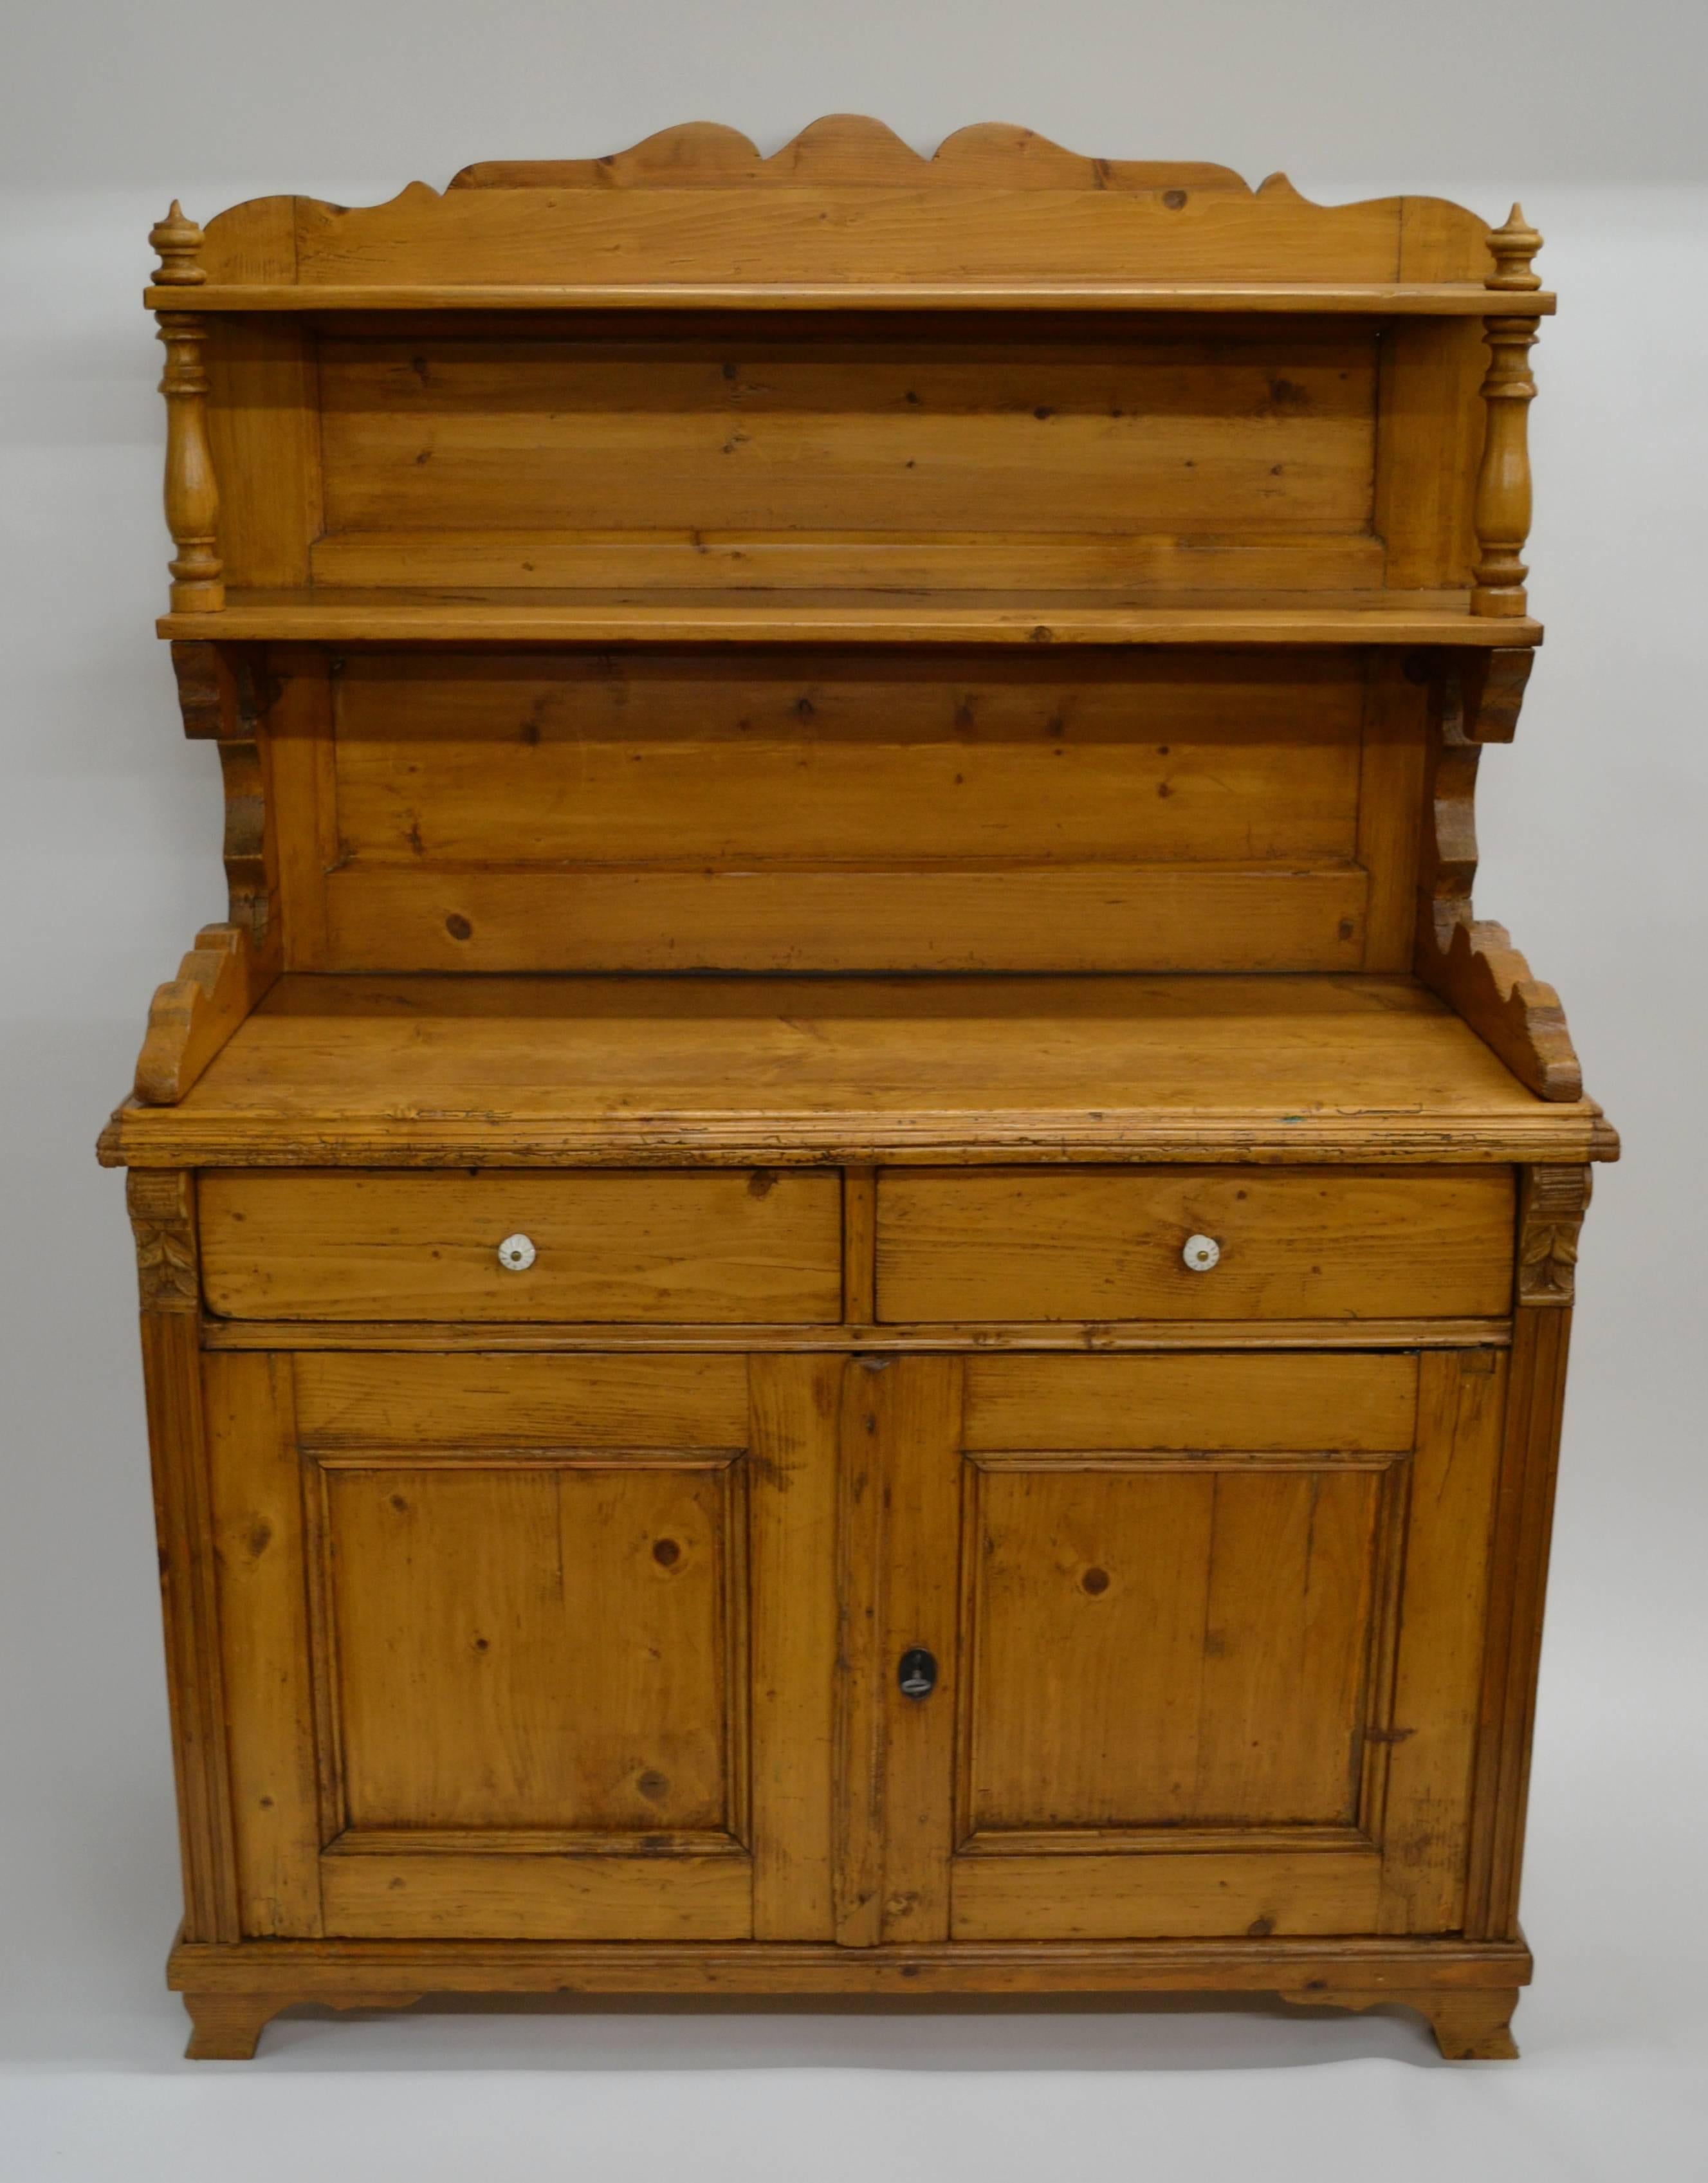 A very rustic and gnarled pine chiffonier, the base with two hand-cut dovetailed drawers above two paneled doors flanked with fluting and acorn corbels. The deep work surface is mounted by a two tier open rack with scalloped side supports beneath a